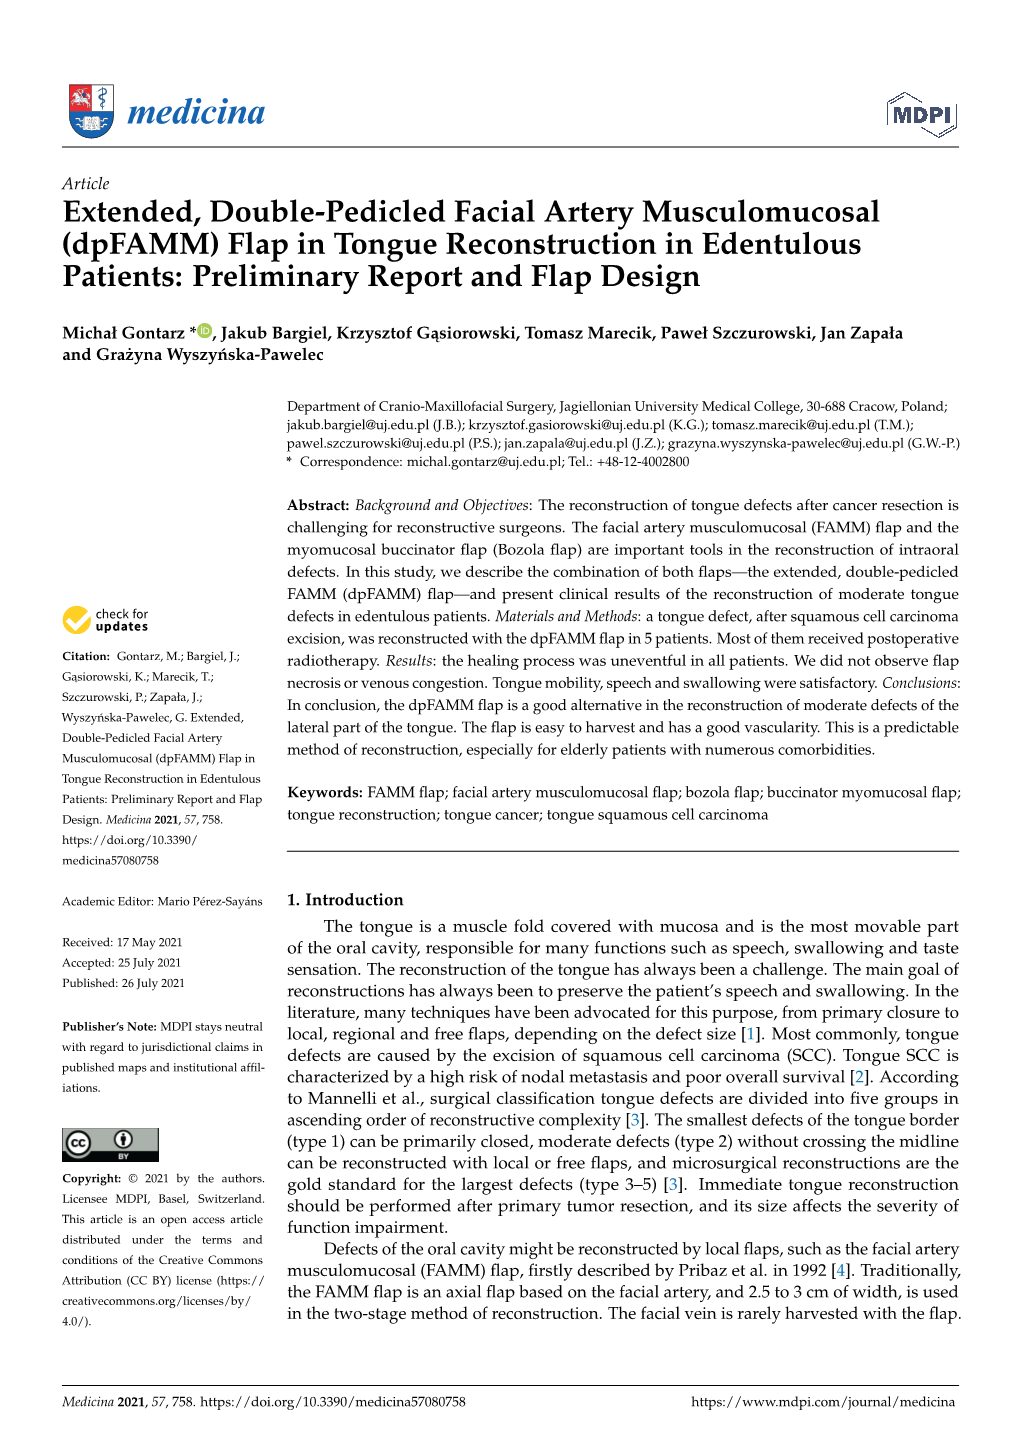 Extended, Double-Pedicled Facial Artery Musculomucosal (Dpfamm) Flap in Tongue Reconstruction in Edentulous Patients: Preliminary Report and Flap Design